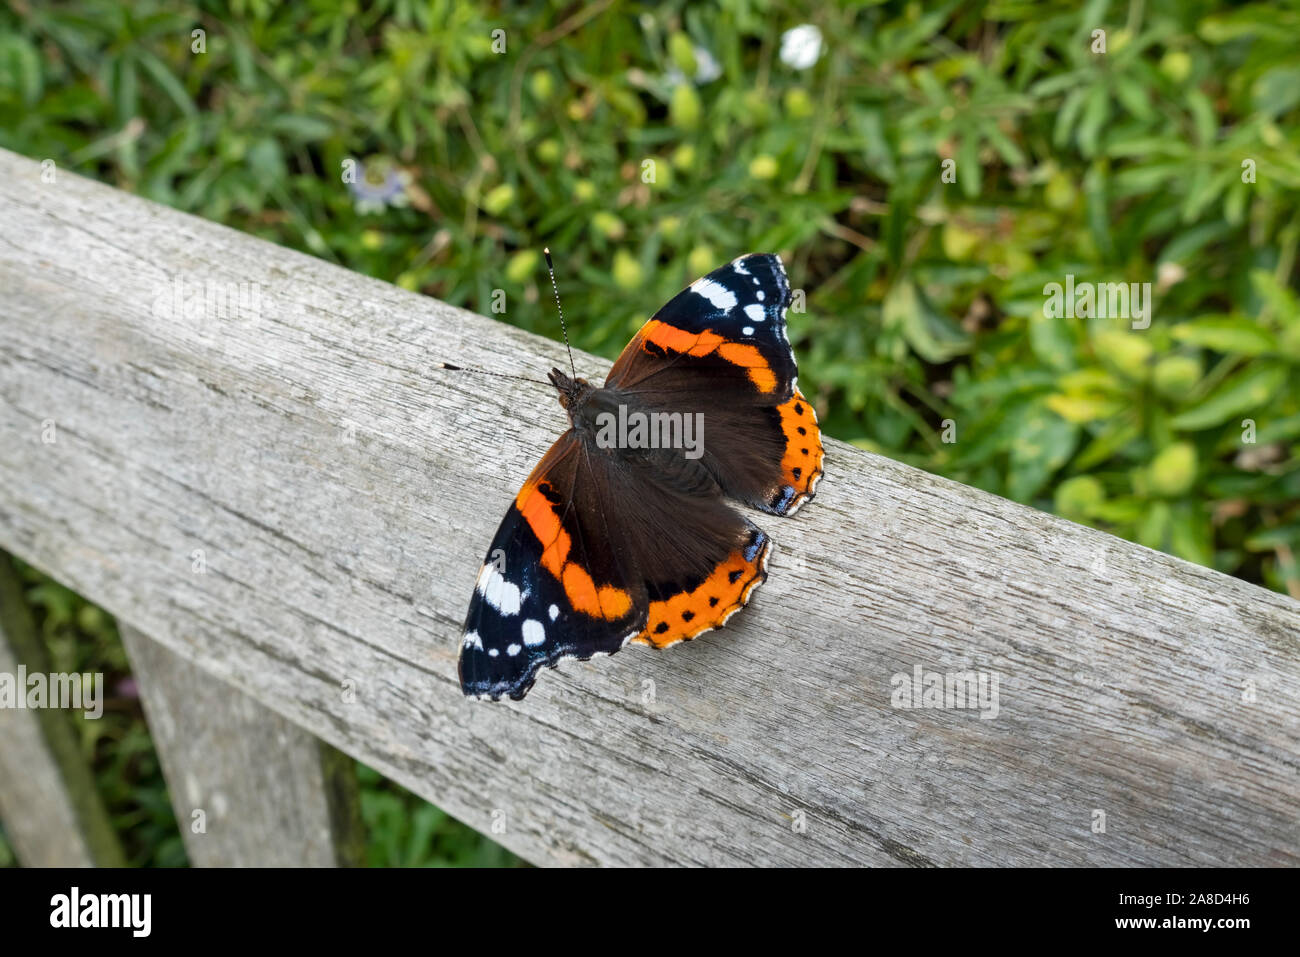 Close up of Red admiral butterfly insect resting on bench in garden England UK United Kingdom GB Great Britain Stock Photo